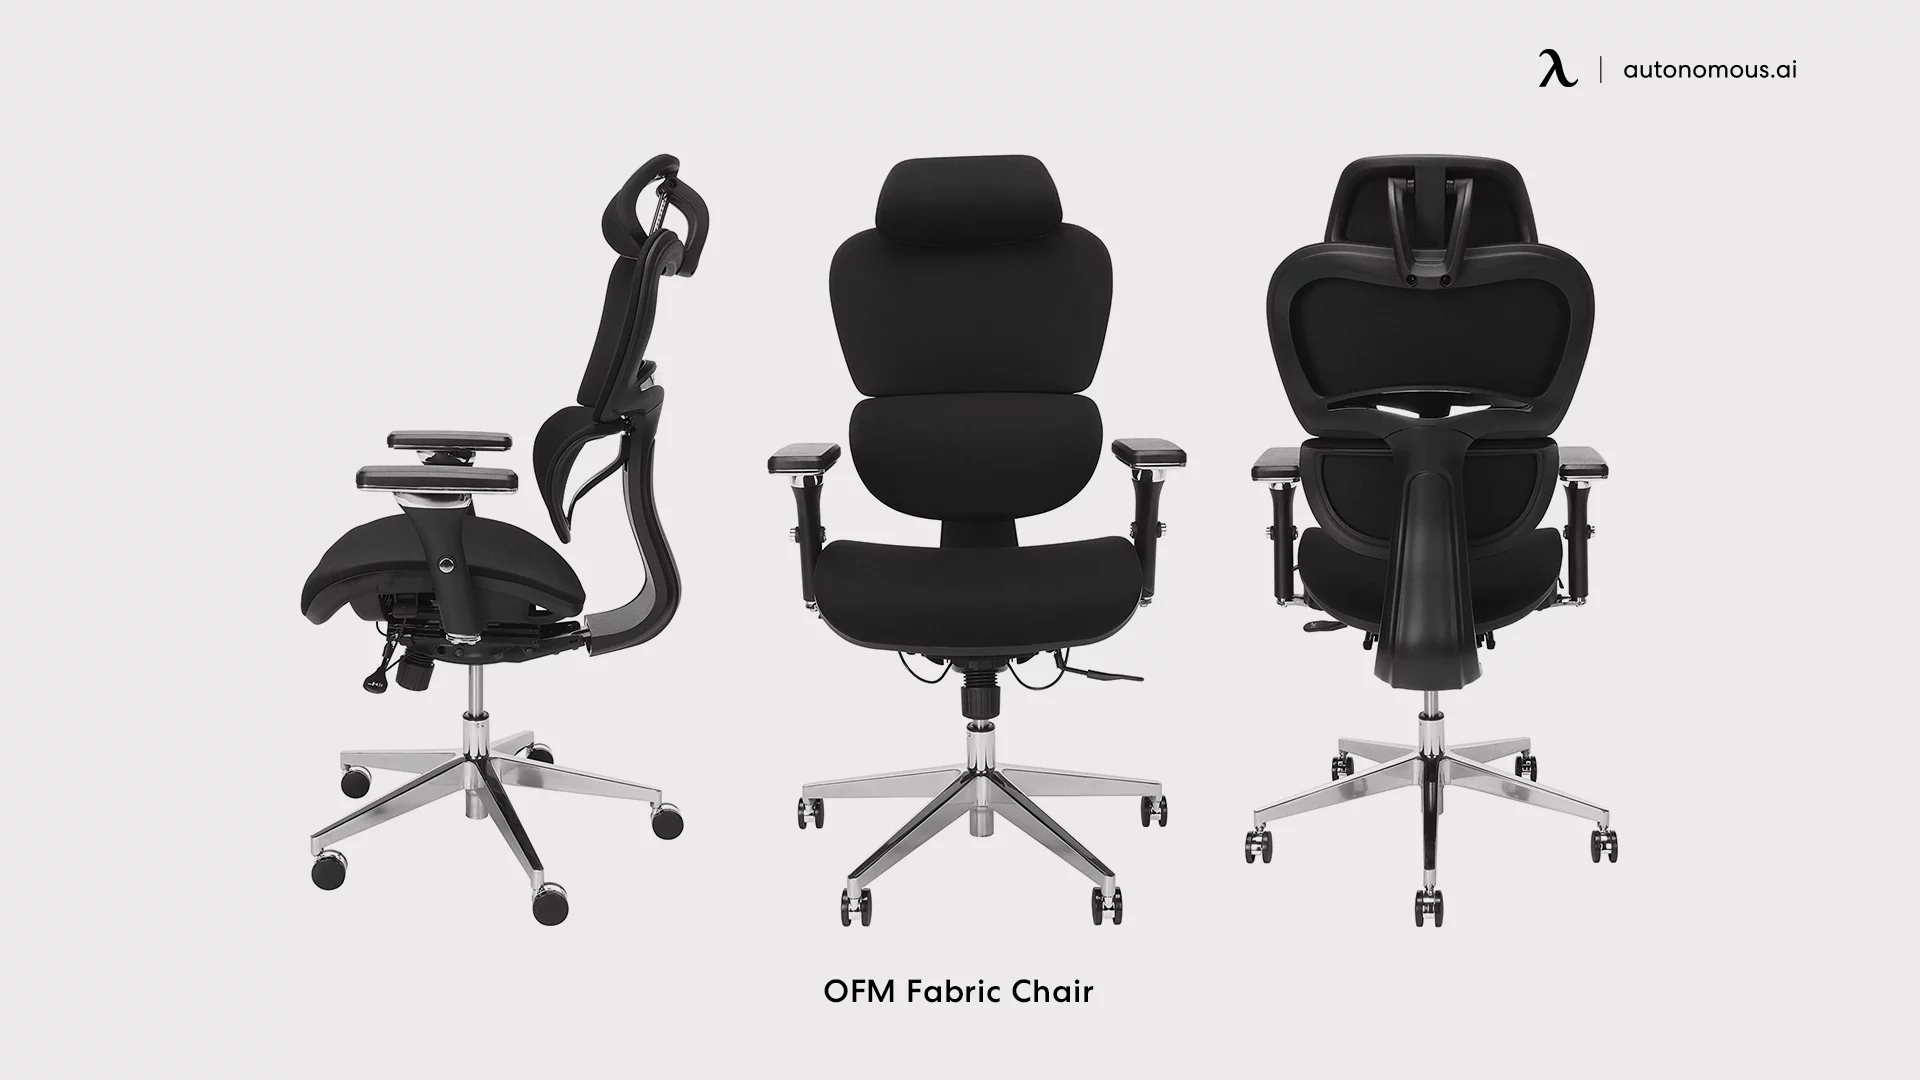 OFM Fabric Chair